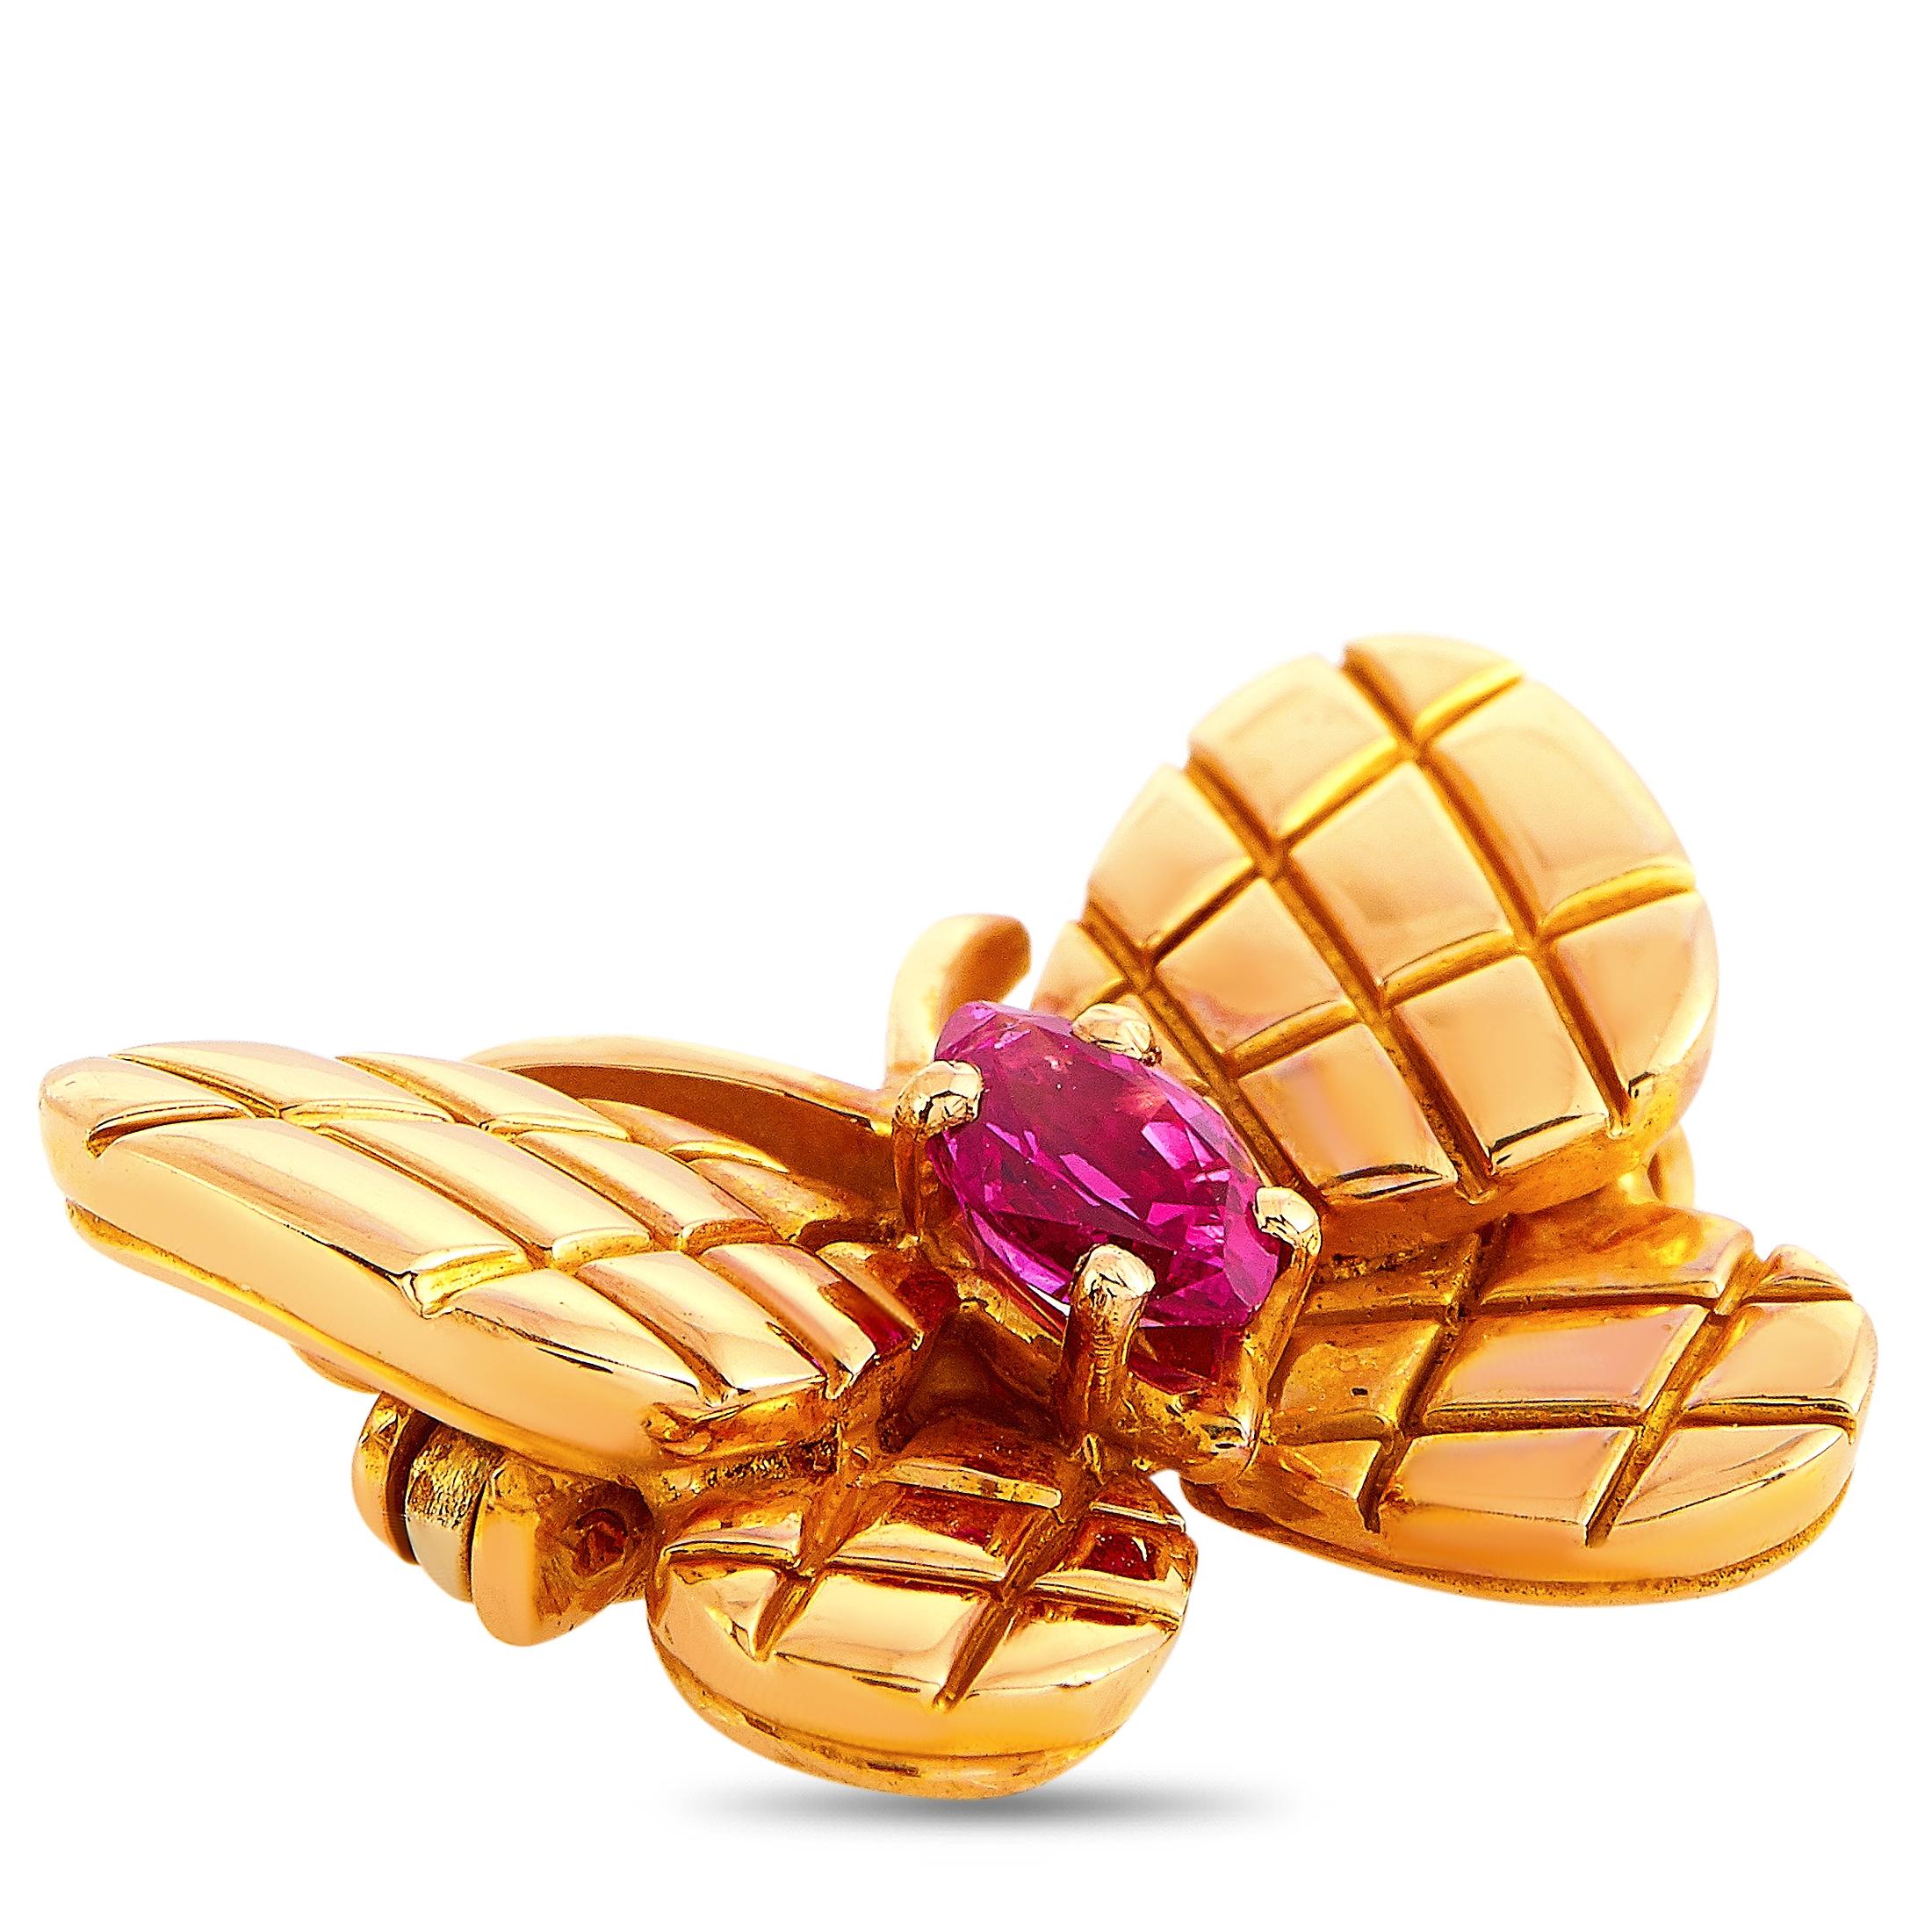 This vintage Van Cleef & Arpels brooch is crafted from 18K rose gold and set with a ruby. It weighs 4.6 grams and measures 0.75” in length and 0.65” in width.
 
 The brooch is offered in estate condition and includes the manufacturer’s box.